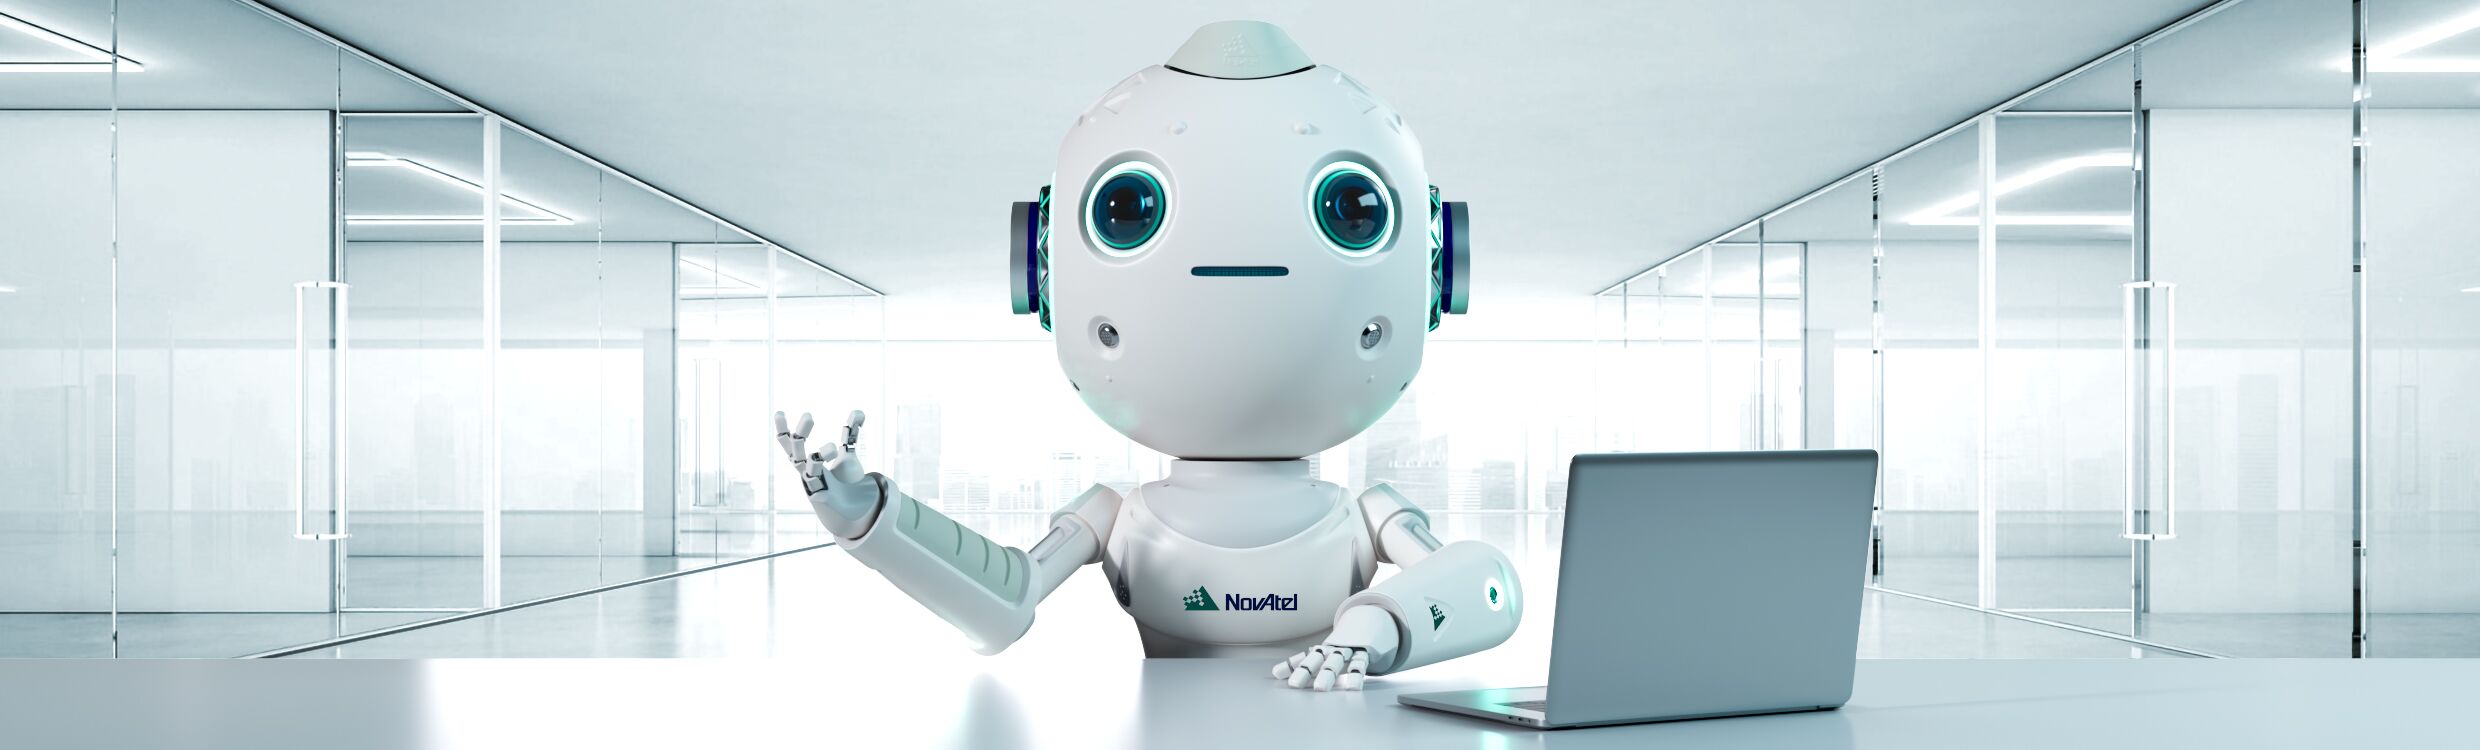 A NovAtel branded white robot with blue eyes named EDIE sitting at a desk with a laptop